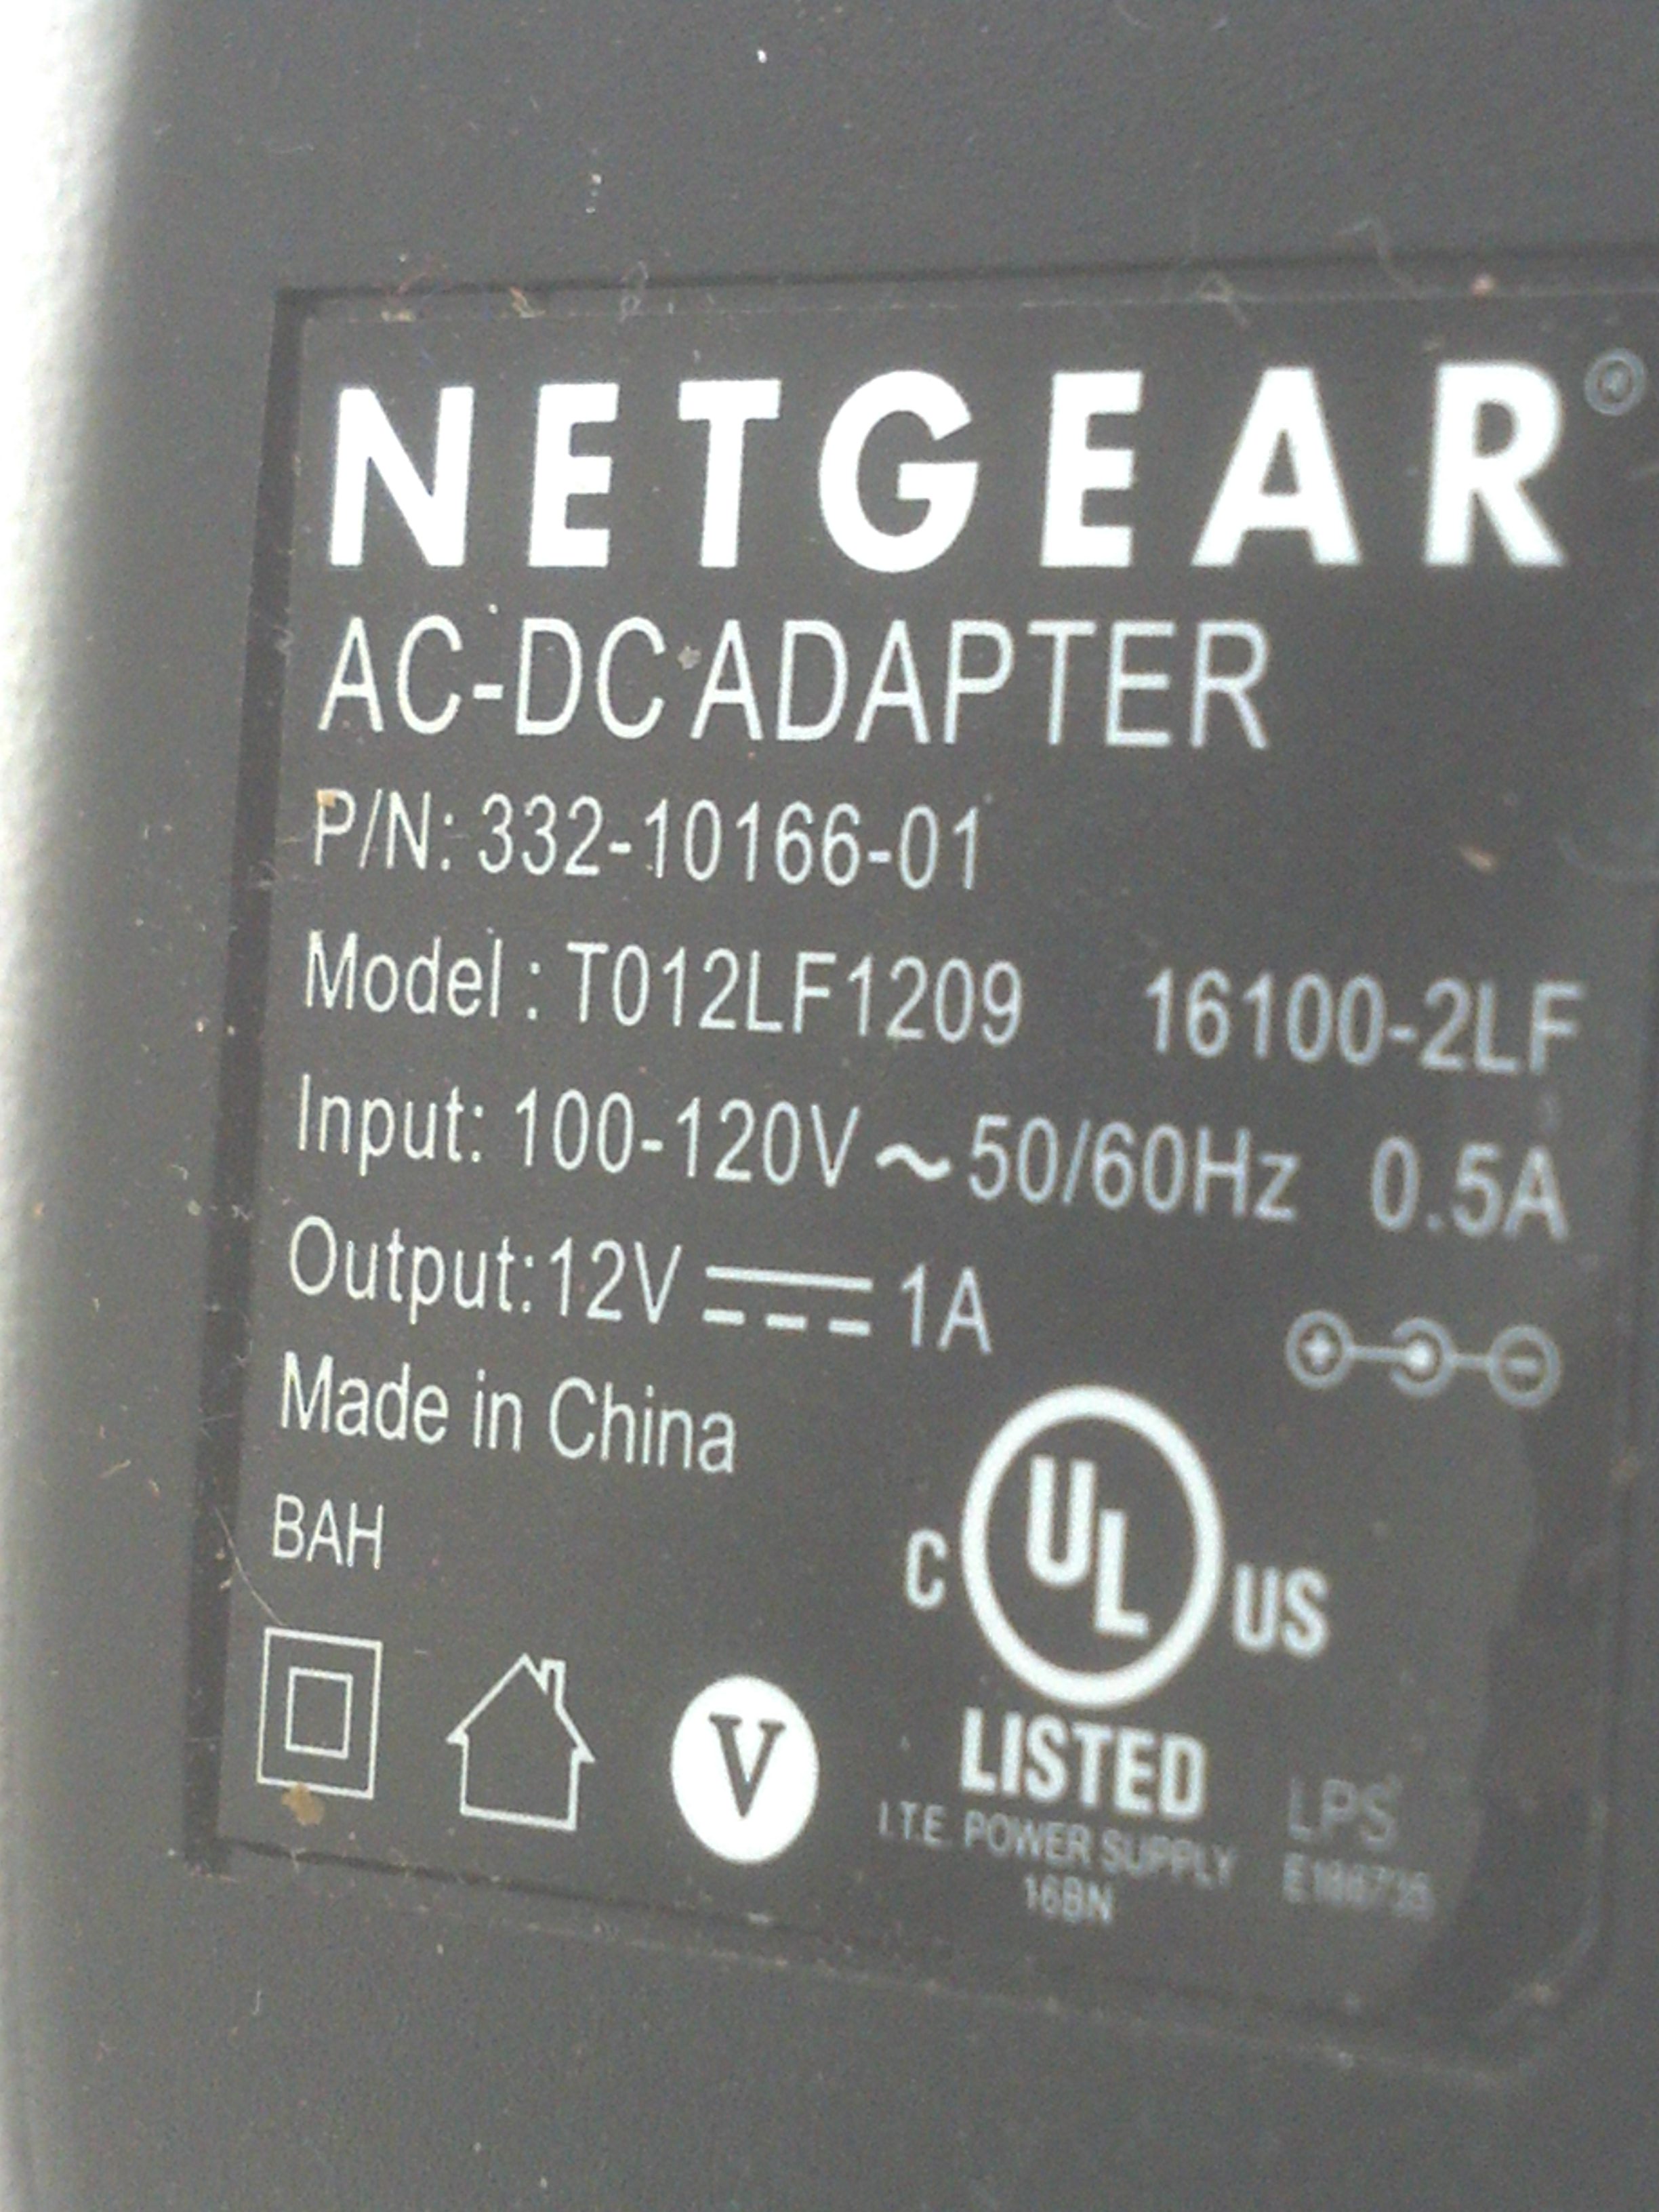 Netgear T012LF1209 AC/DC Adapter Charger Power Supply P/N: 332-10166-01, 12V 1A